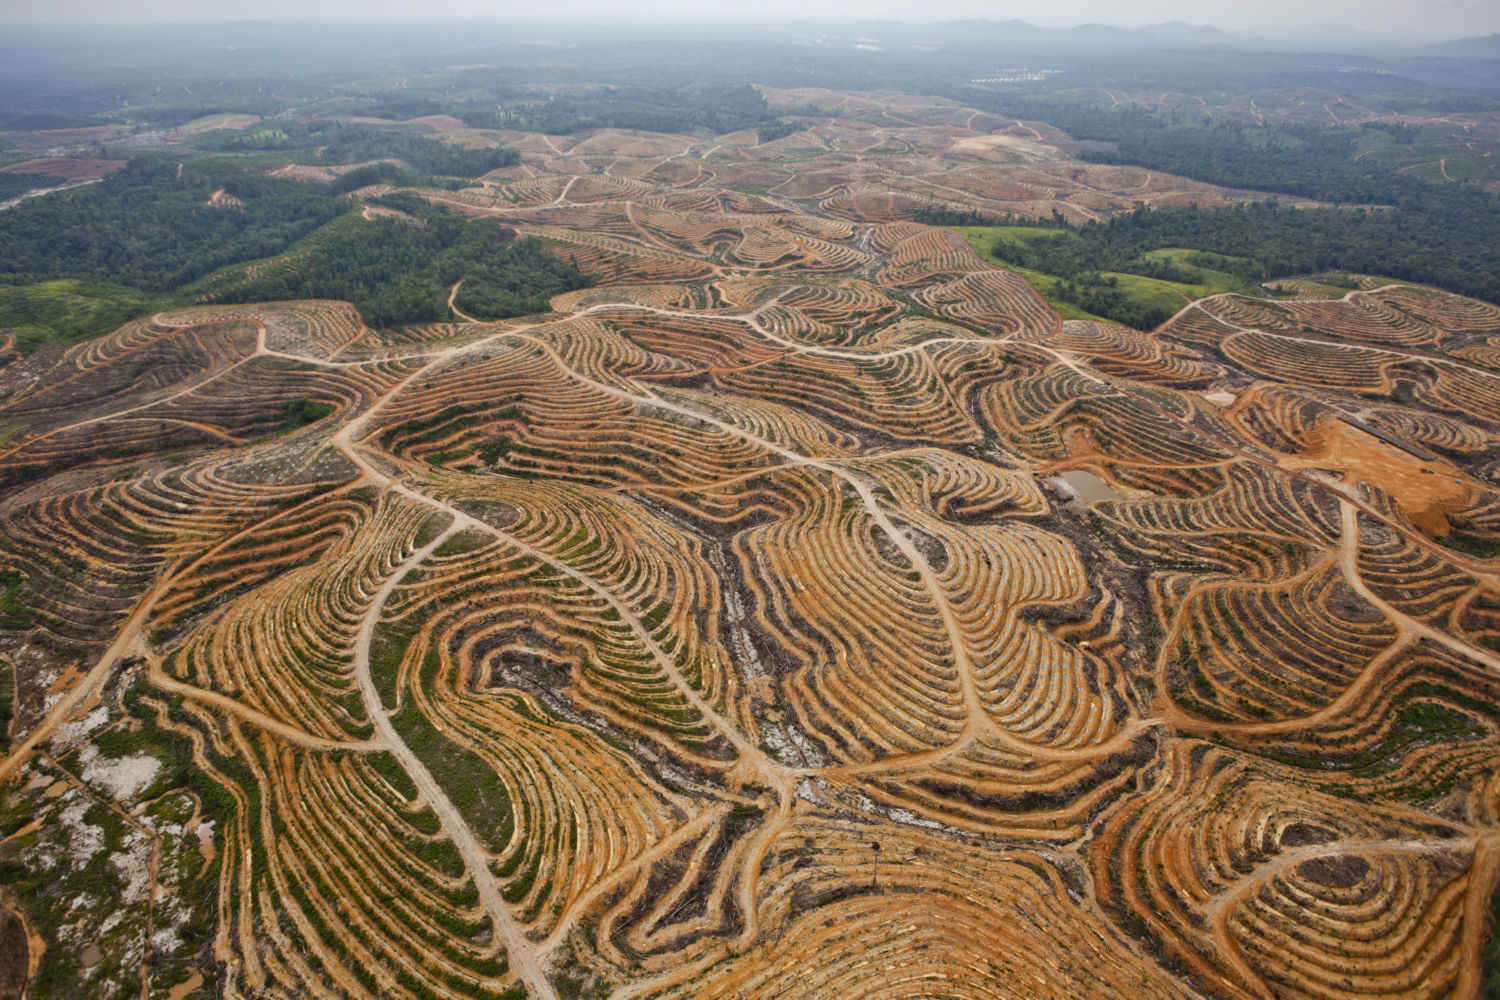 Rate of deforestation in Indonesia overtakes Brazil — Kaltimber